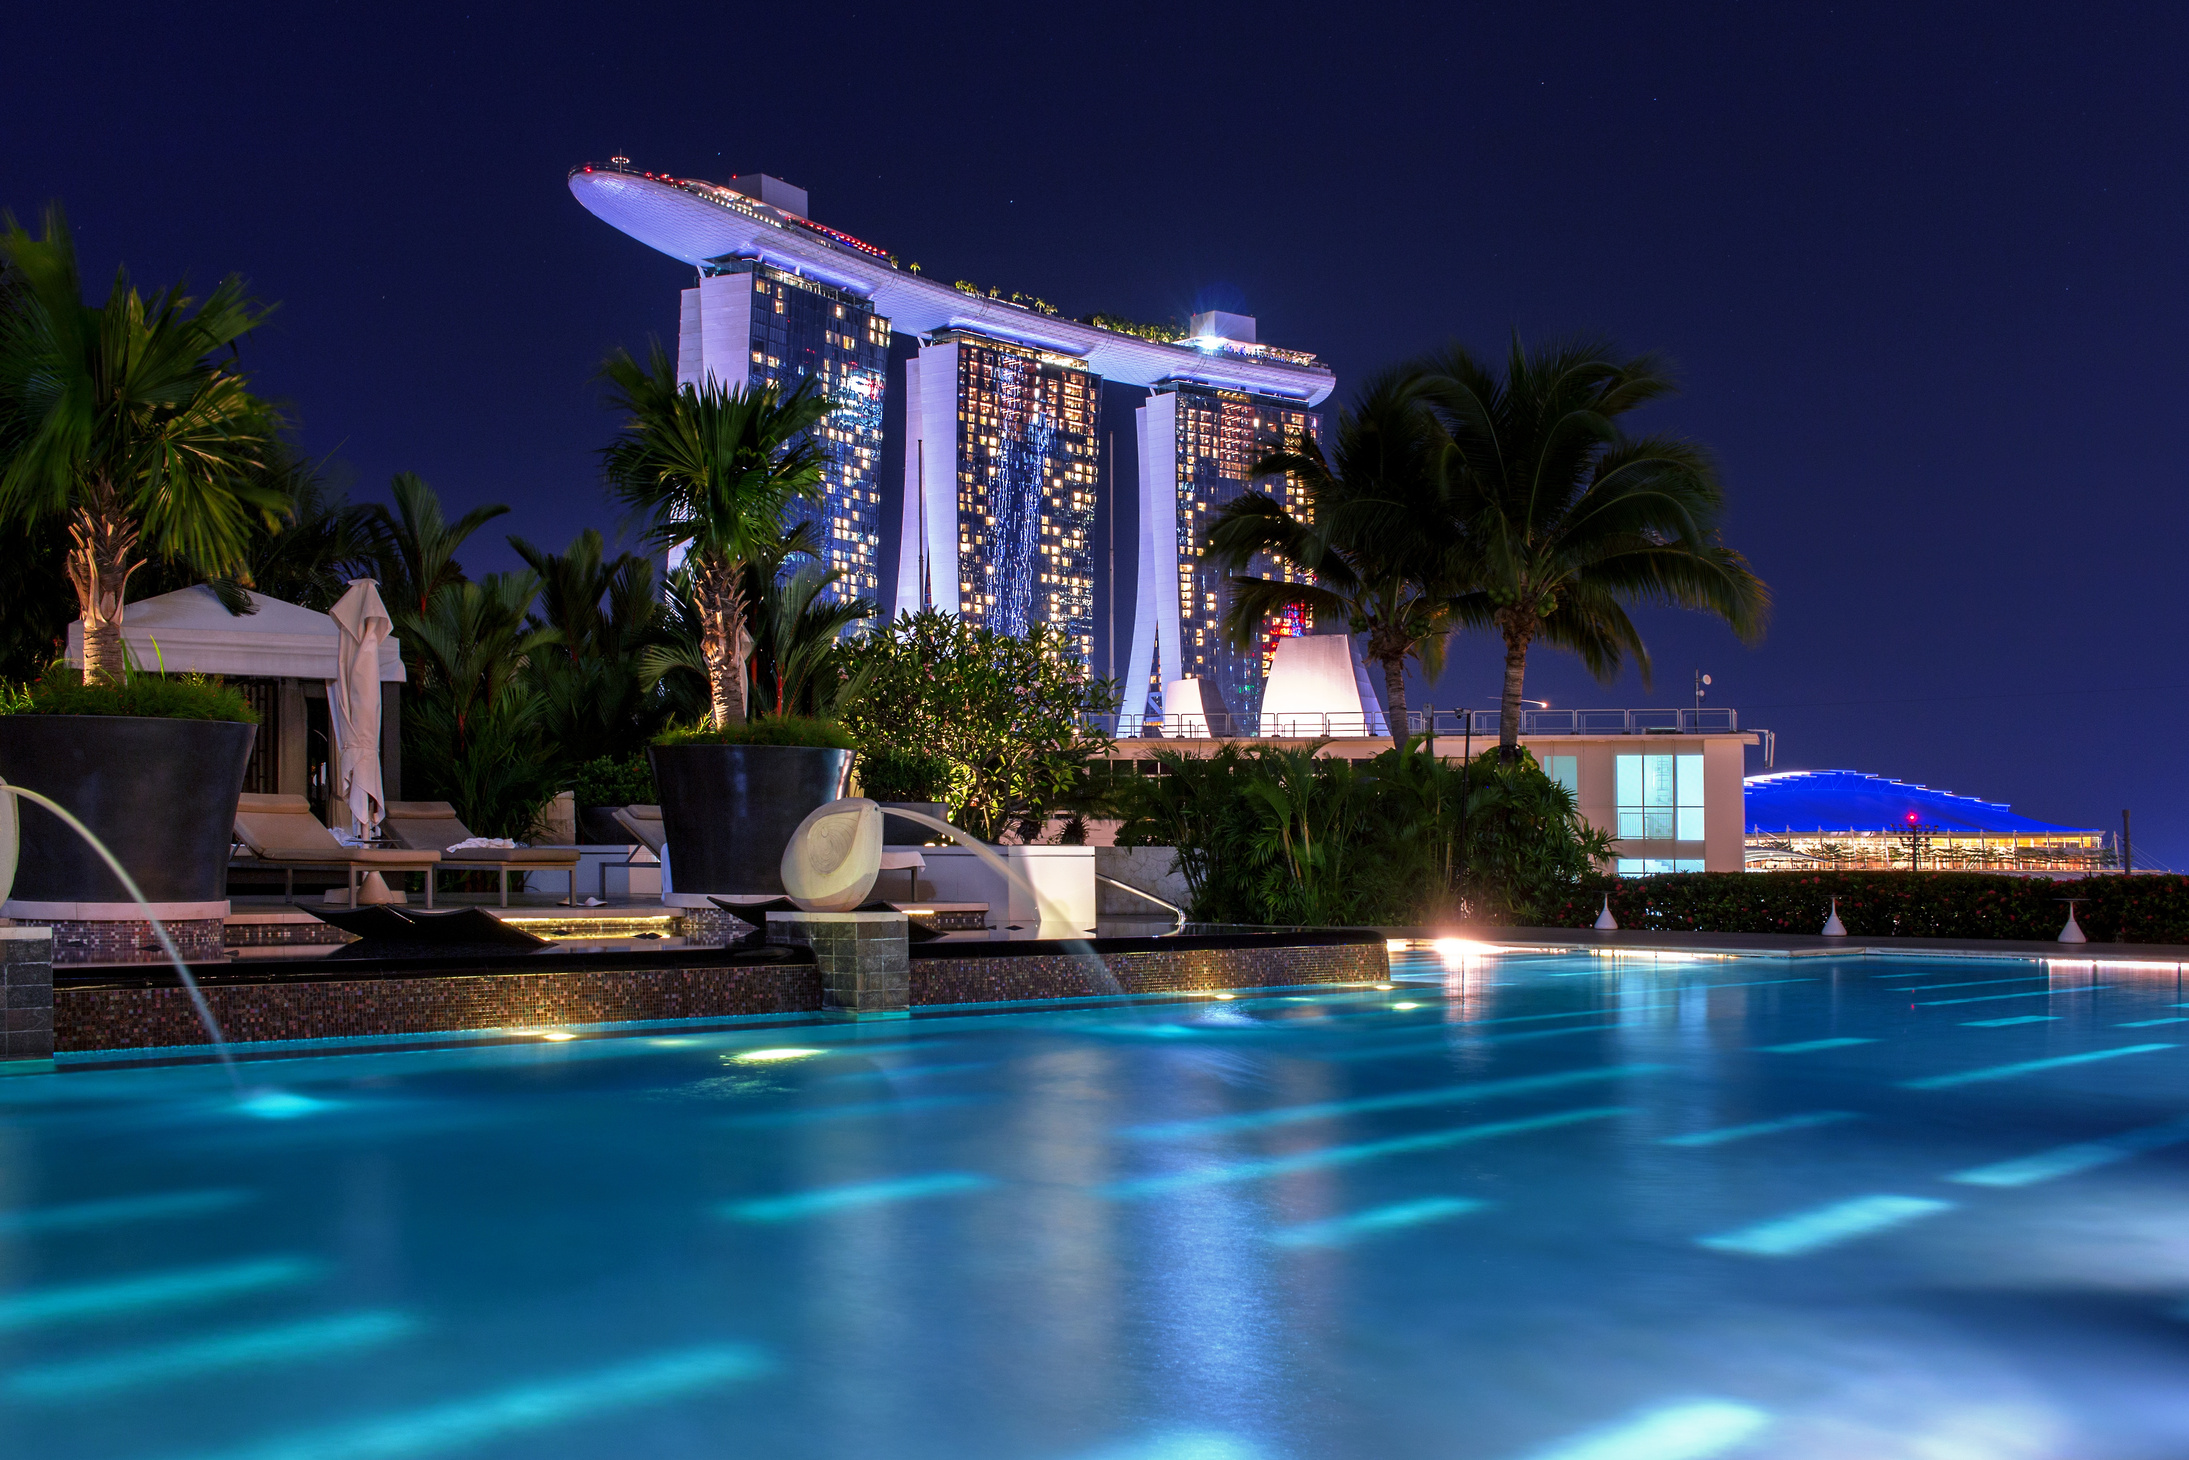 Singapore Building At Night From a Luxury Pool